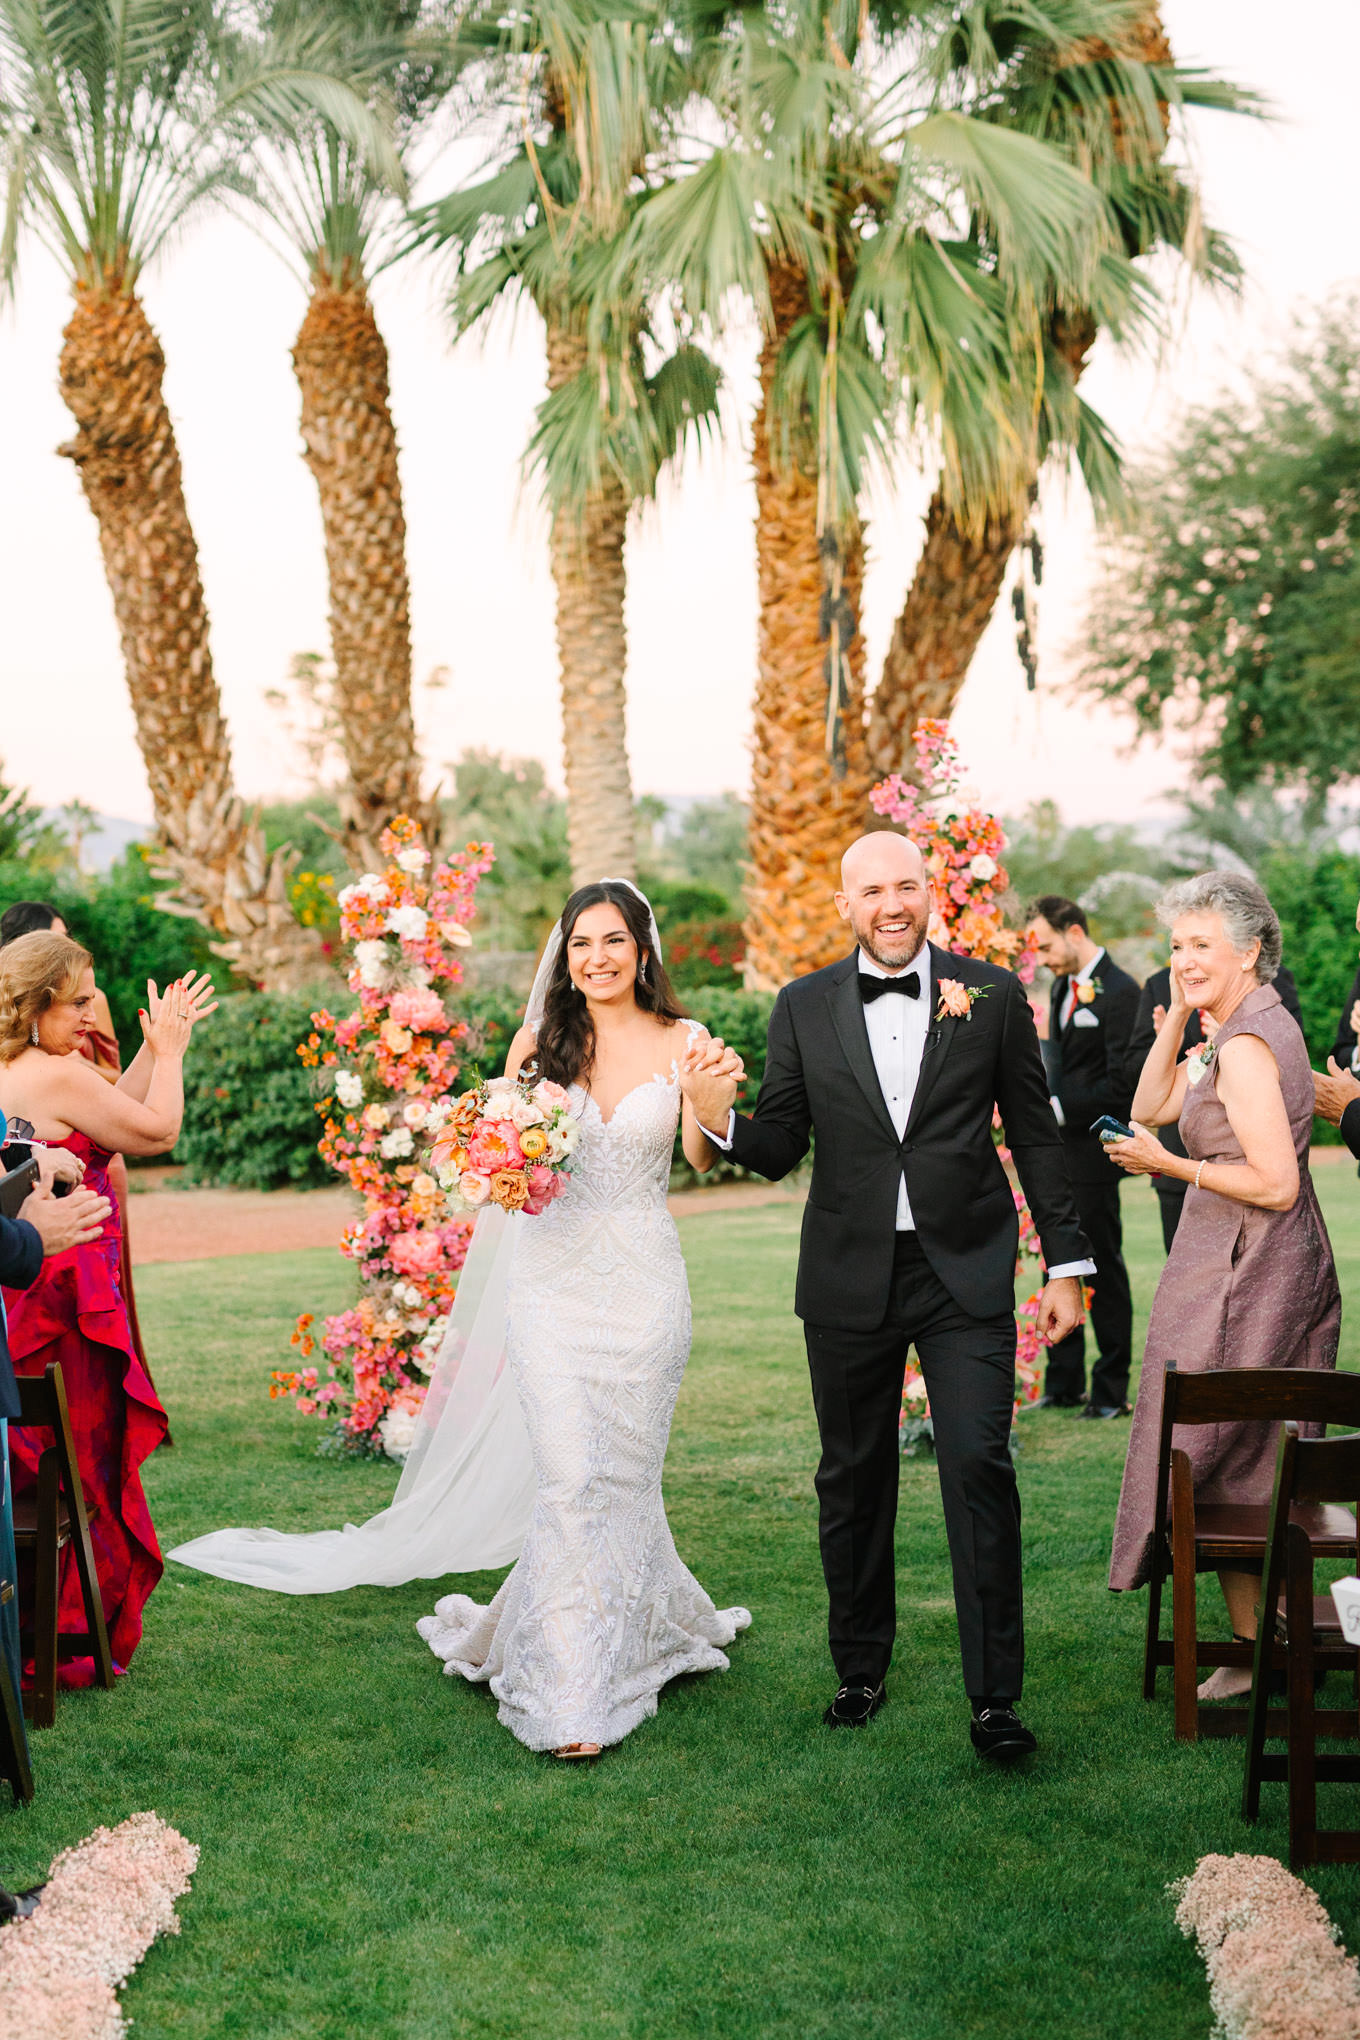 Couples walk down the aisle | Pink Bougainvillea Estate wedding | Colorful LA wedding photography | #bougainvilleaestate #palmspringswedding #palmspringsweddingvenue #palmspringsphotographer Source: Mary Costa Photography | Los Angeles